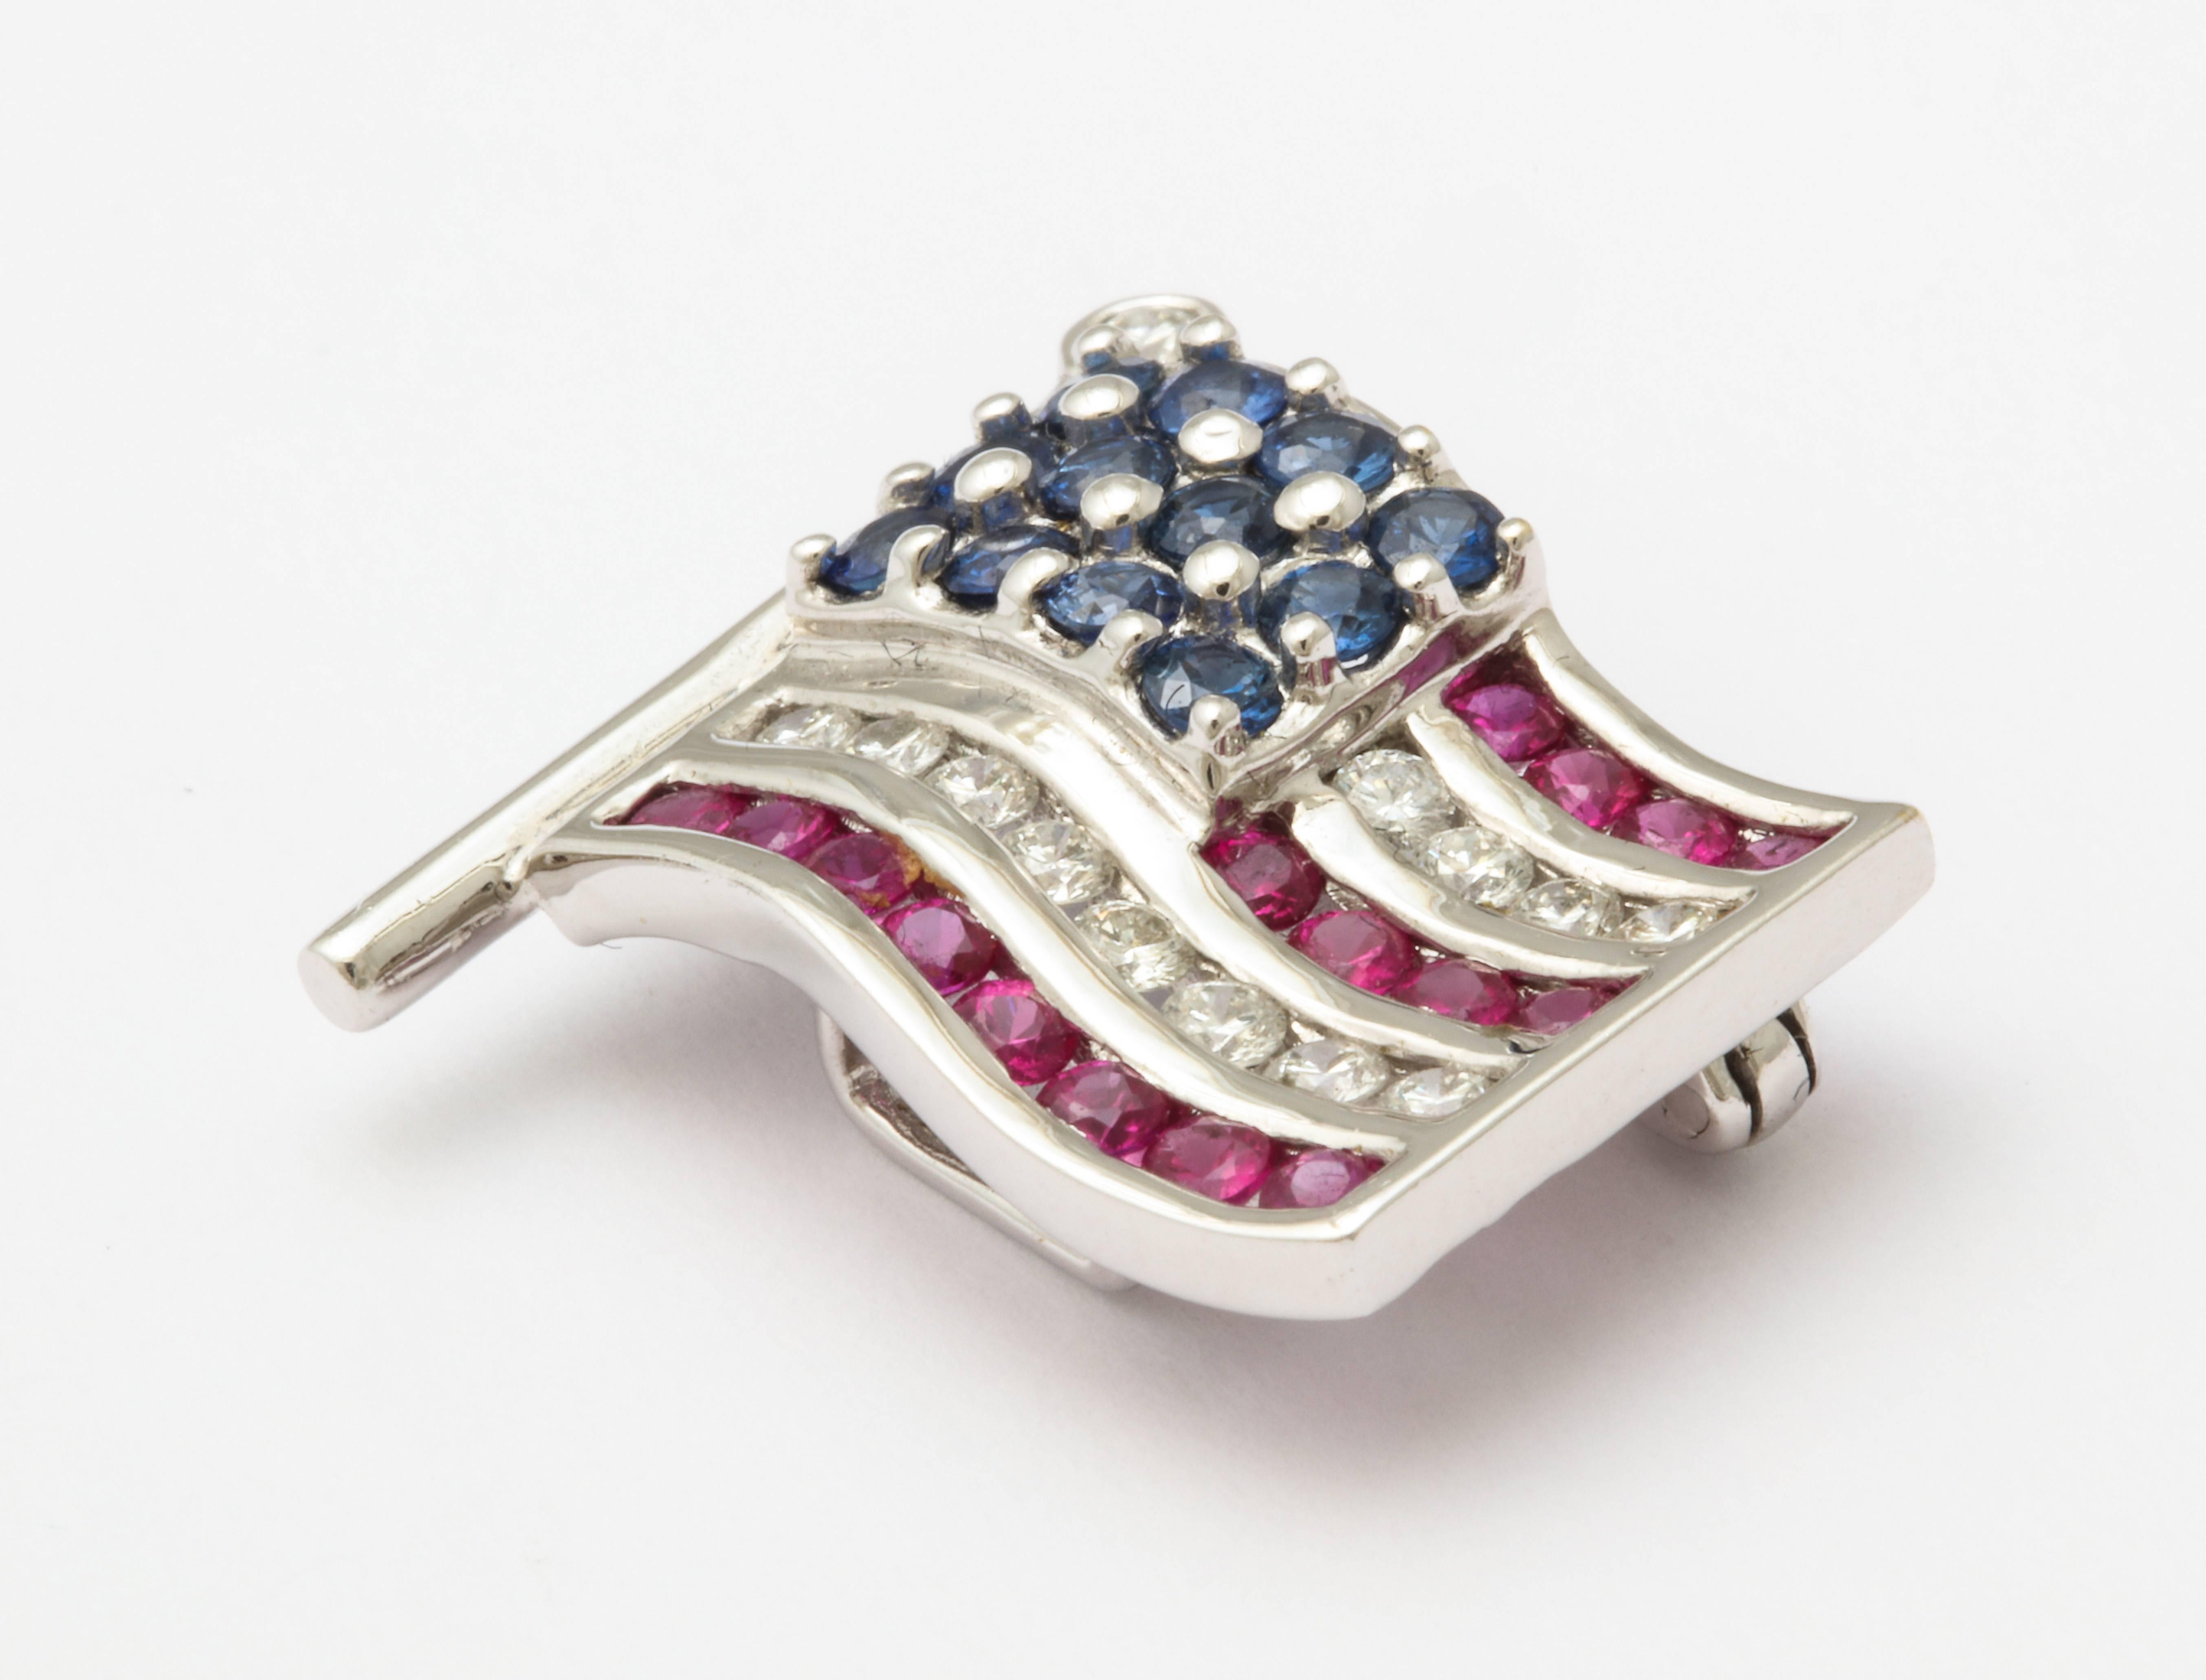 The perfect scale American flag lapel pin for Him or Her in 18K white gold, set with rubies, sapphires and diamonds. Dated 1990 in Roman numerals, marked 18K and 750, weighs 6.5 grams, and measures 3/4 inch x 3/4 inch. 